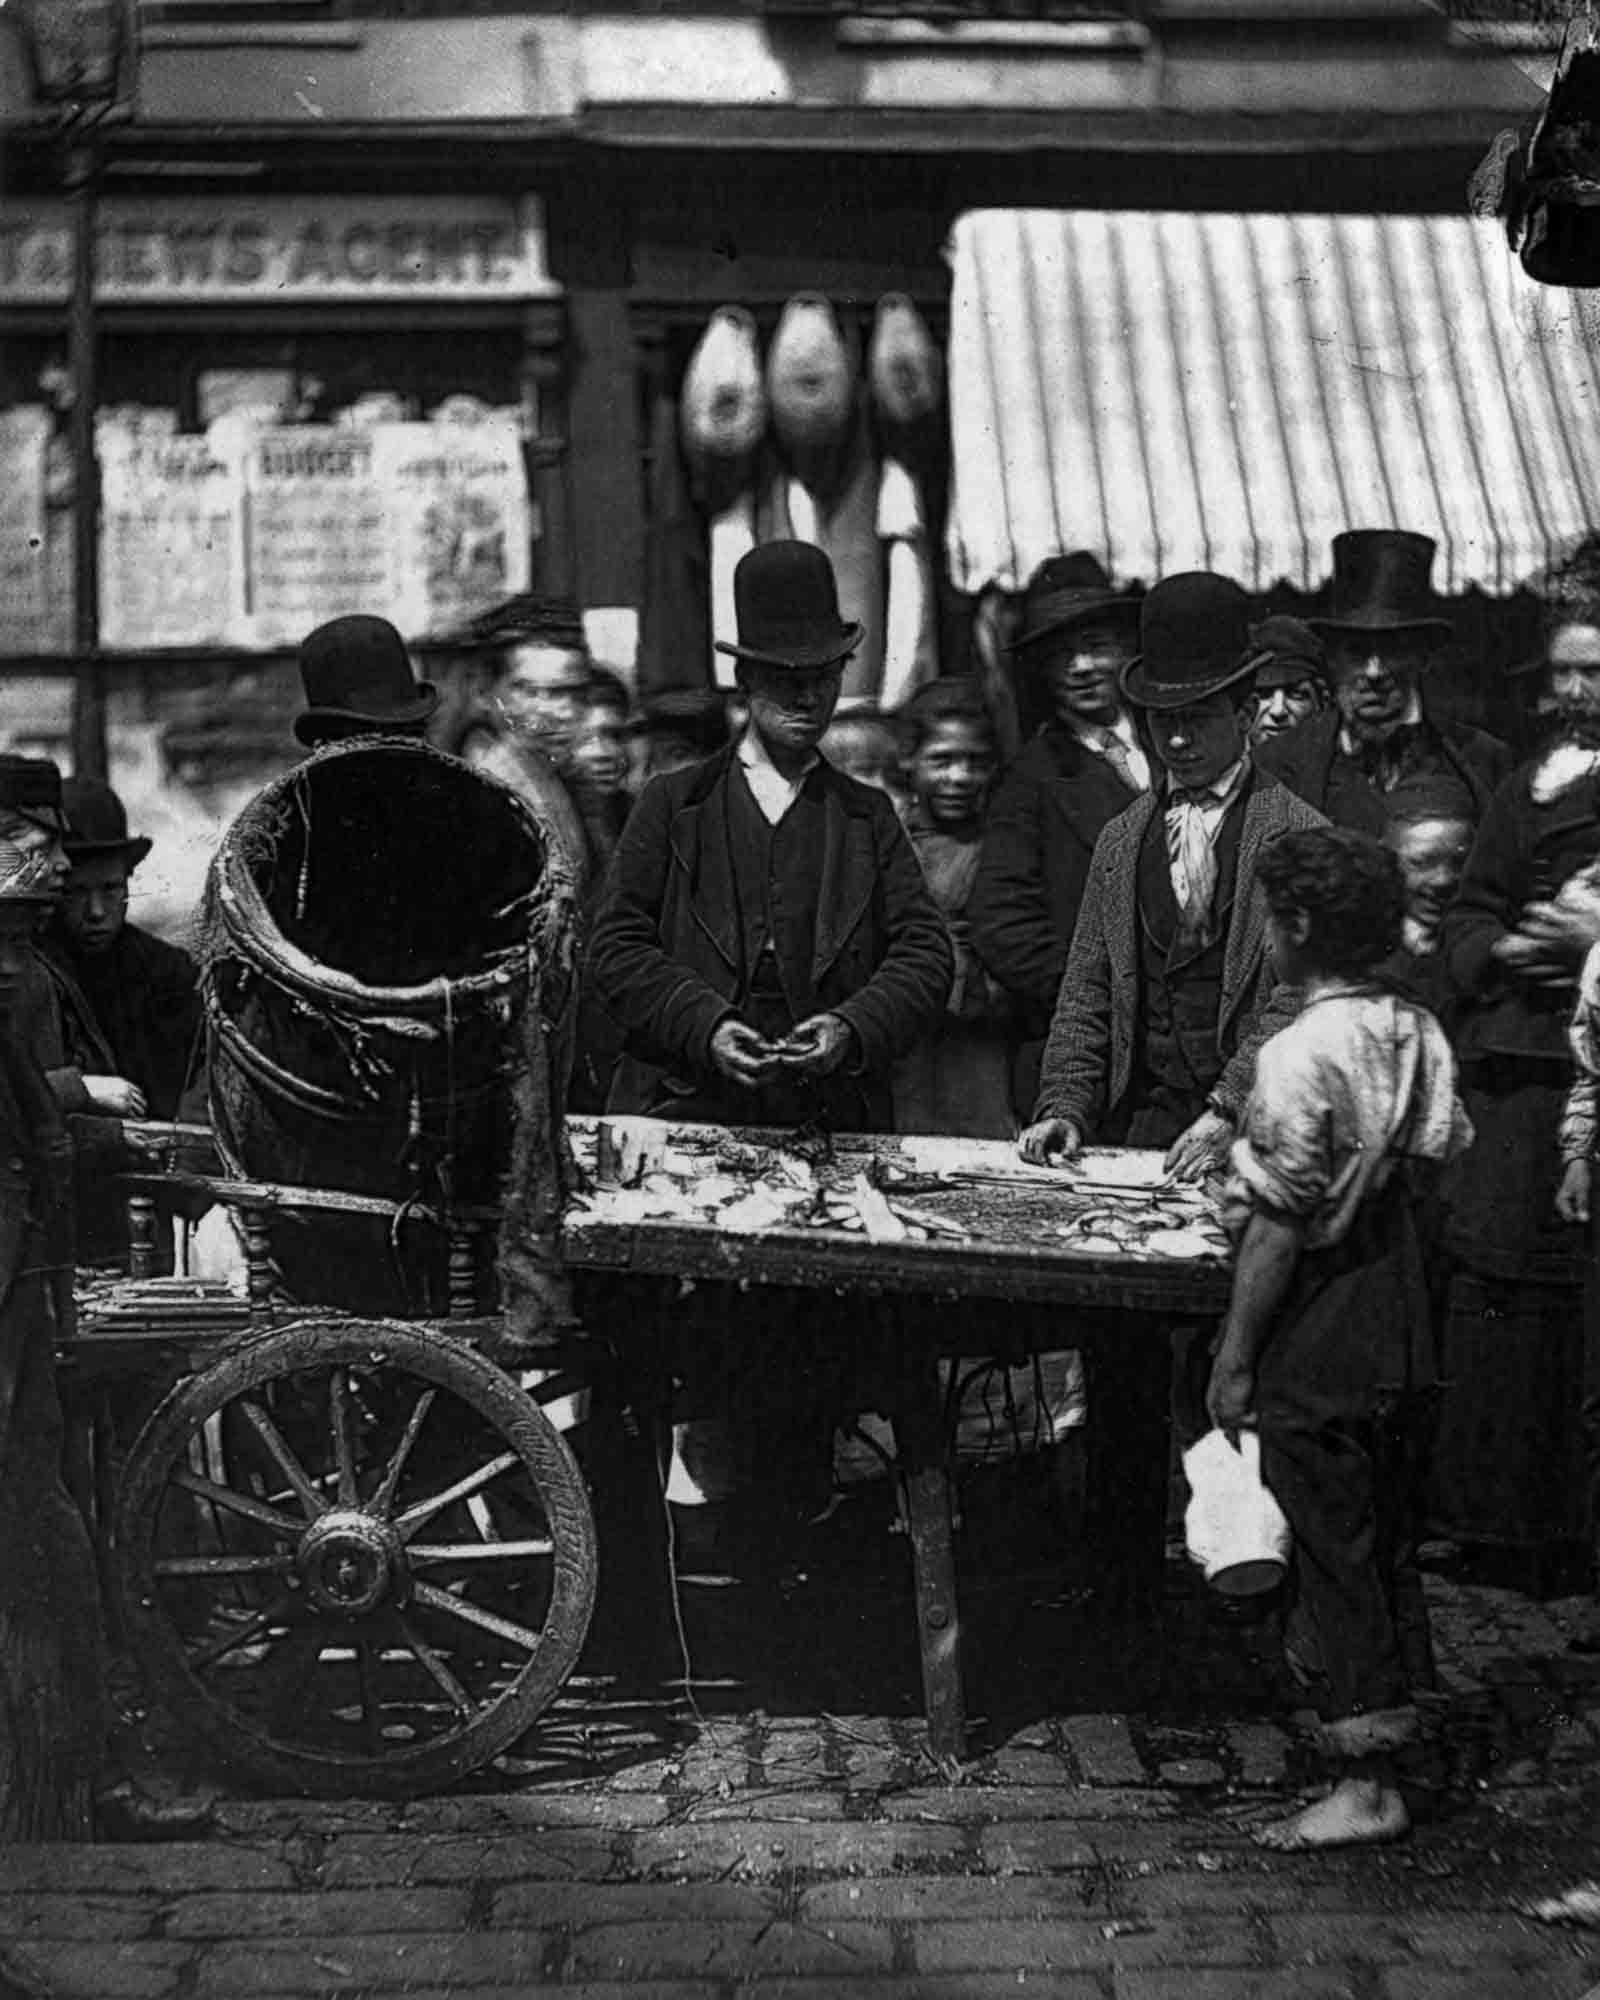 Costermonger Joseph Carney sells fresh herring from his barrow in the street market between Seven Dials and Five Dials in London, 1877